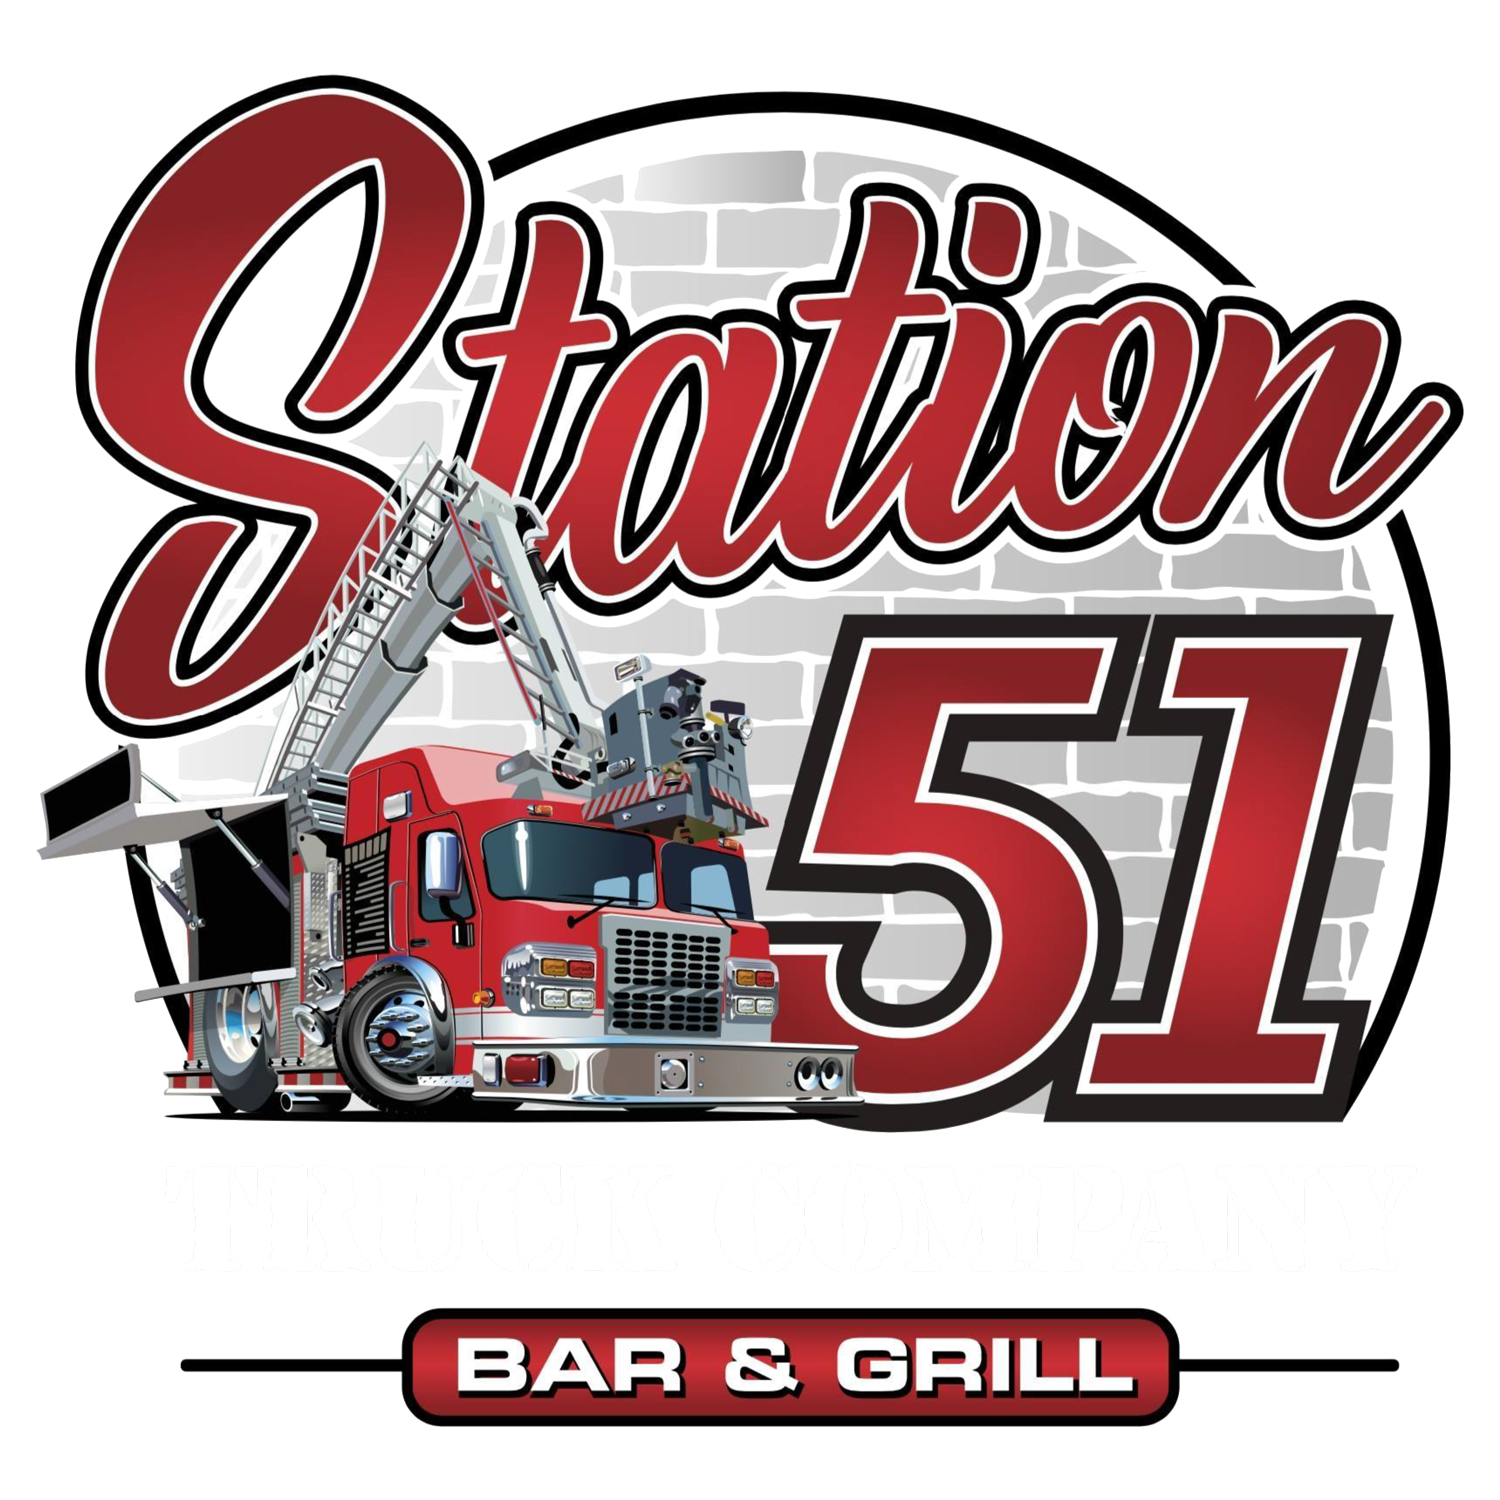 Station 51 Truck Company Bar & Grill Home